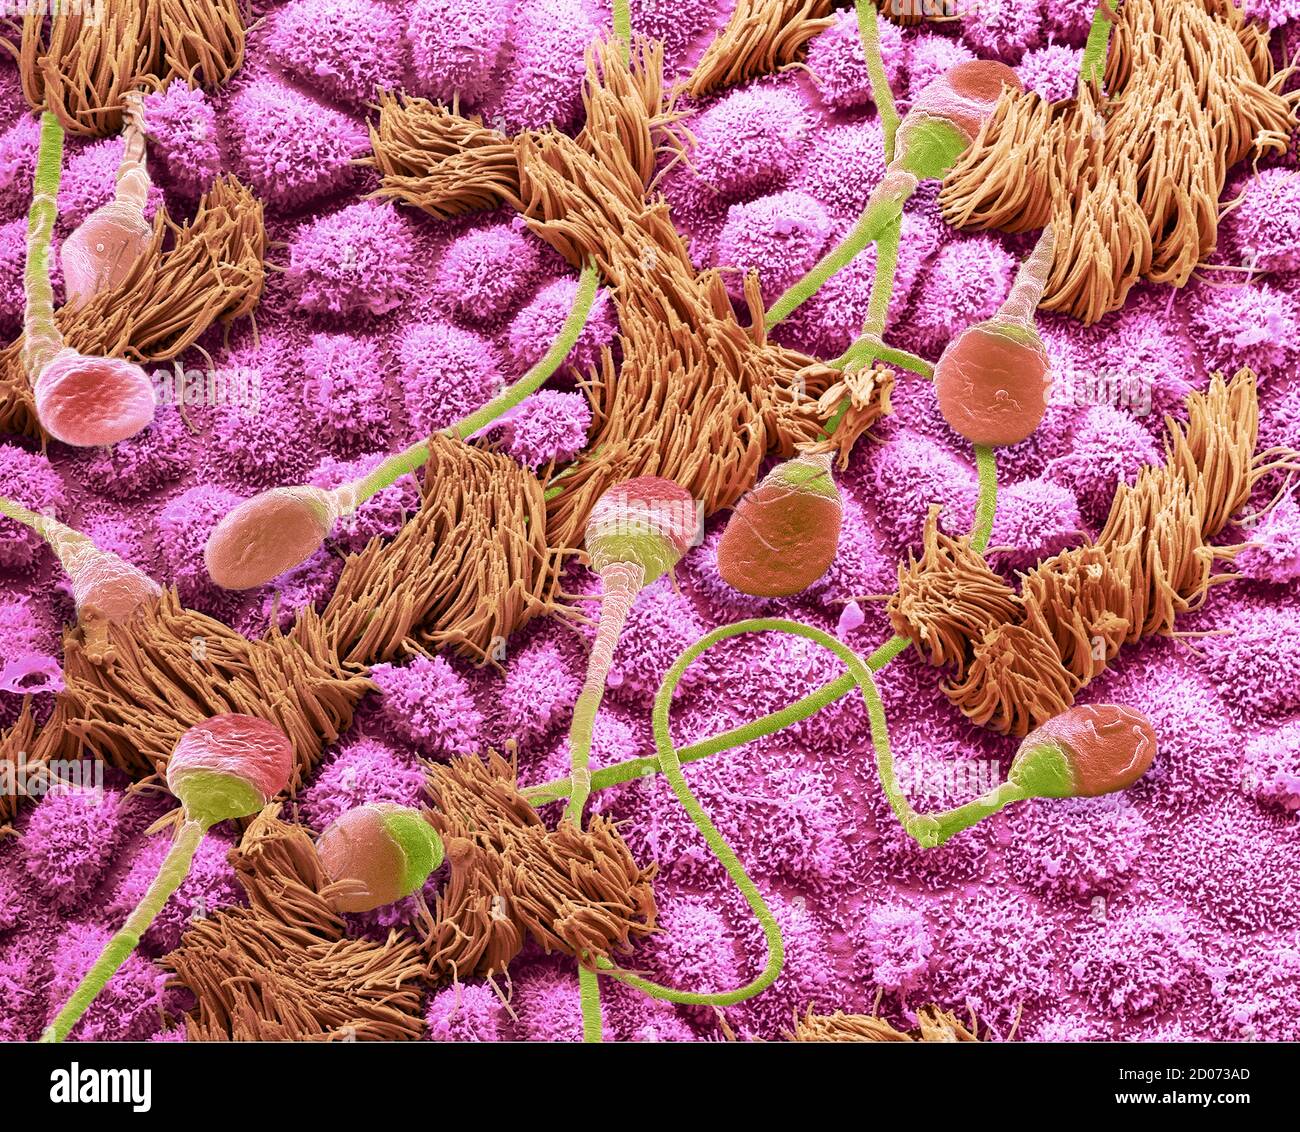 Sperm in a fallopian tube. Coloured composition scanning electron micrograph (SEM) of human sperm travelling through a fallopian tube (oviduct) of a f Stock Photo